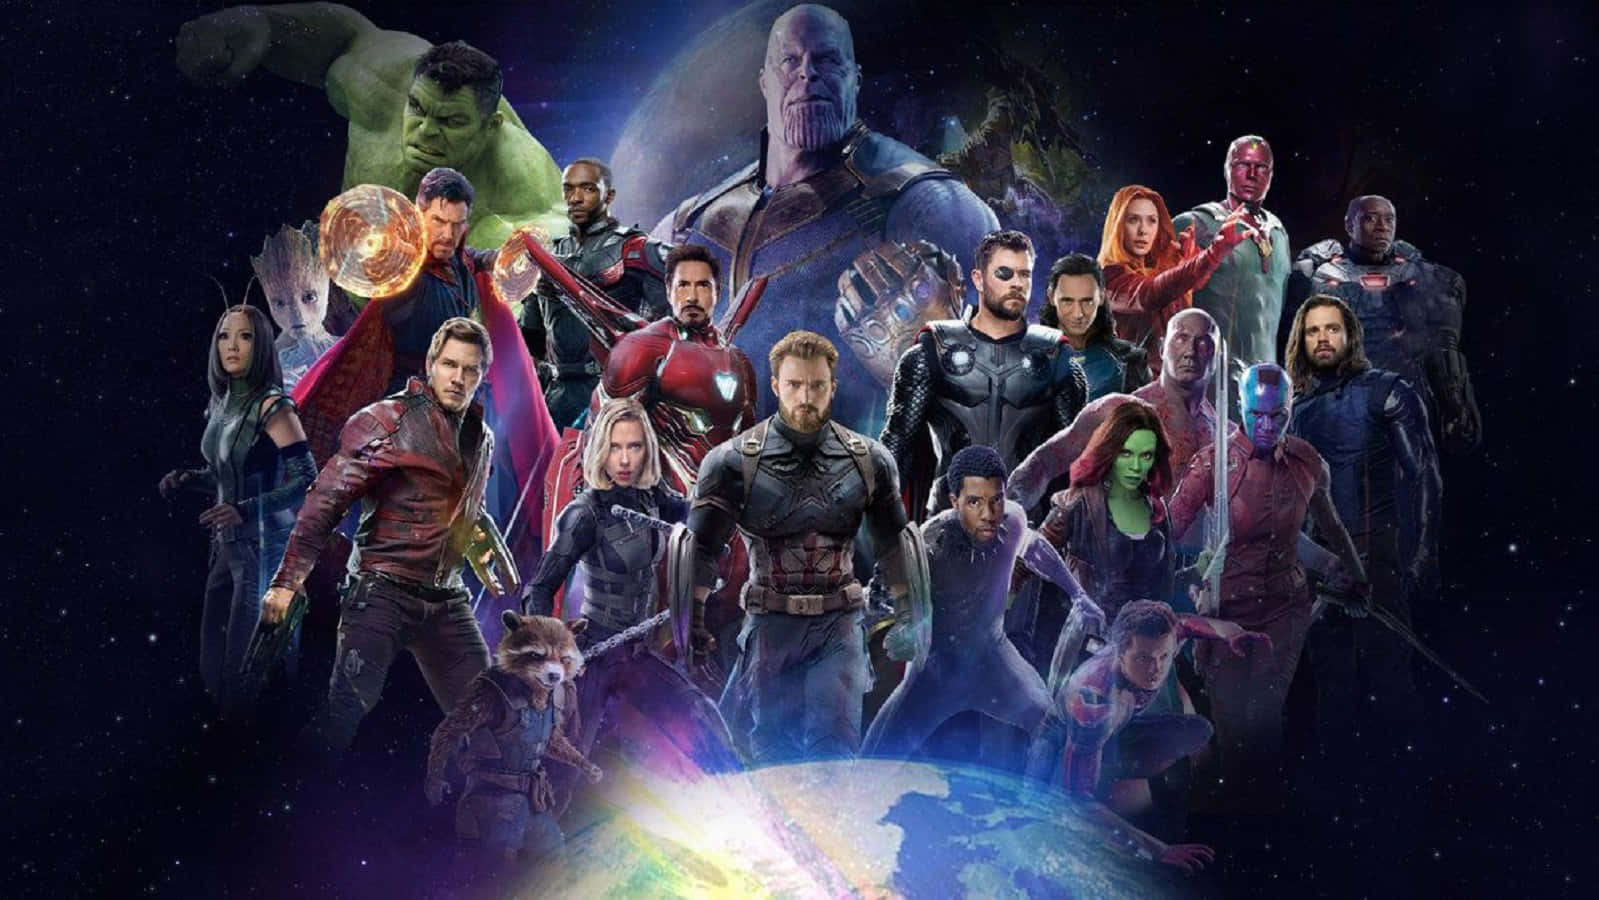 The Avengers assemble to protect the universe against Thanos in Avengers: Infinity War